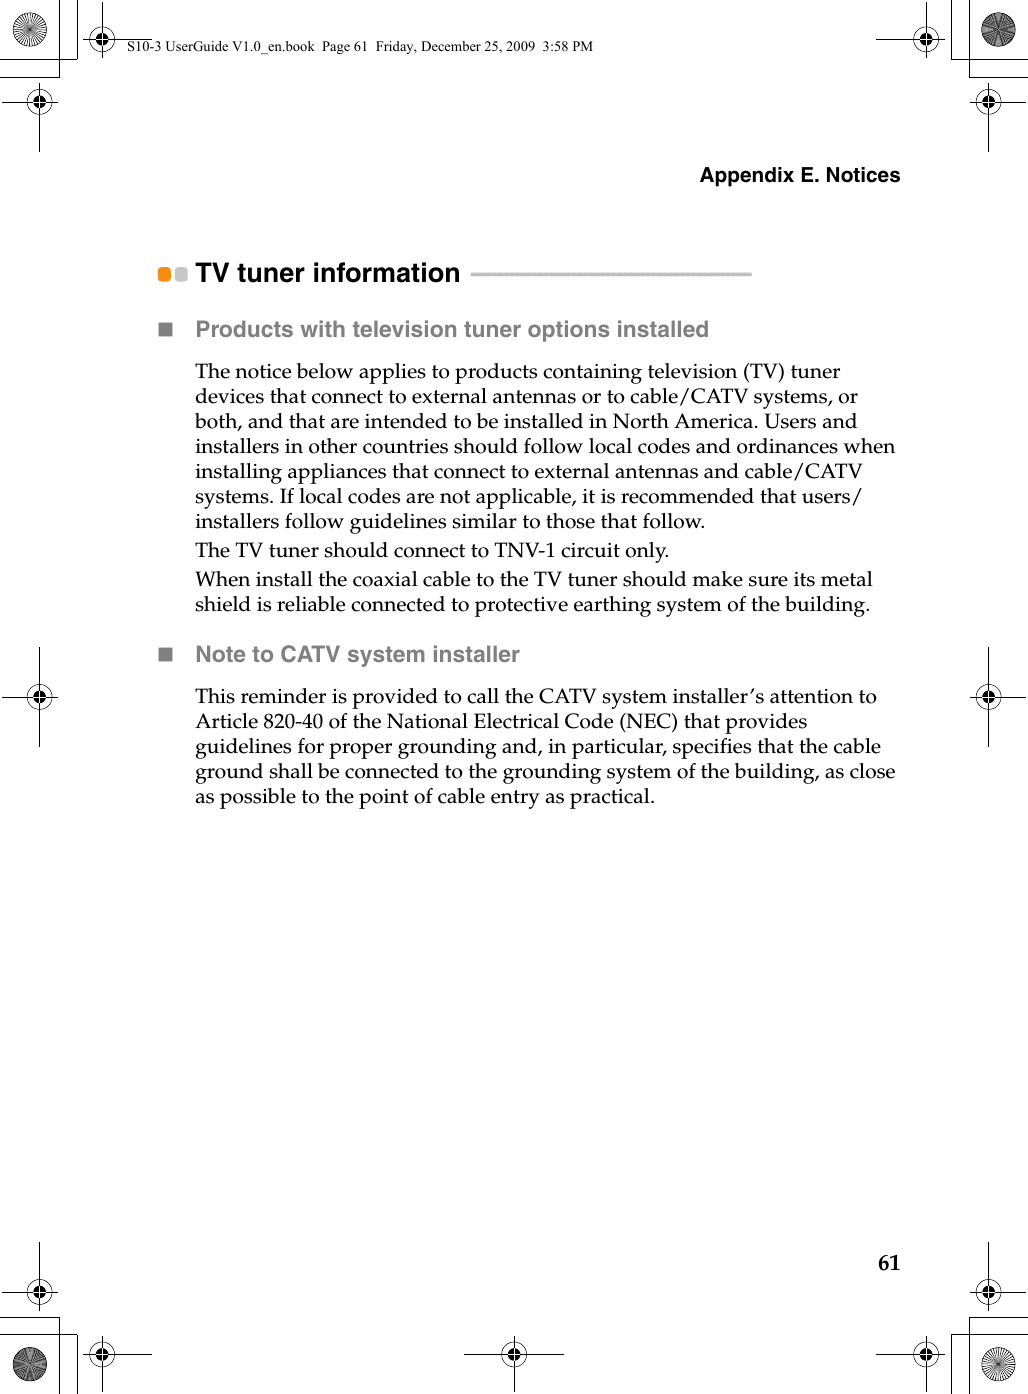 Appendix E. Notices61TV tuner information  - - - - - - - - - - - - - - - - - - - - - - - - - - - - - - - - - - - - - - - - - - - - - - - - -Products with television tuner options installedThe notice below applies to products containing television (TV) tuner devices that connect to external antennas or to cable/CATV systems, or both, and that are intended to be installed in North America. Users and installers in other countries should follow local codes and ordinances when installing appliances that connect to external antennas and cable/CATV systems. If local codes are not applicable, it is recommended that users/installers follow guidelines similar to those that follow.The TV tuner should connect to TNV-1 circuit only.When install the coaxial cable to the TV tuner should make sure its metal shield is reliable connected to protective earthing system of the building.Note to CATV system installerThis reminder is provided to call the CATV system installer’s attention to Article 820-40 of the National Electrical Code (NEC) that provides guidelines for proper grounding and, in particular, specifies that the cable ground shall be connected to the grounding system of the building, as close as possible to the point of cable entry as practical.S10-3 UserGuide V1.0_en.book  Page 61  Friday, December 25, 2009  3:58 PM